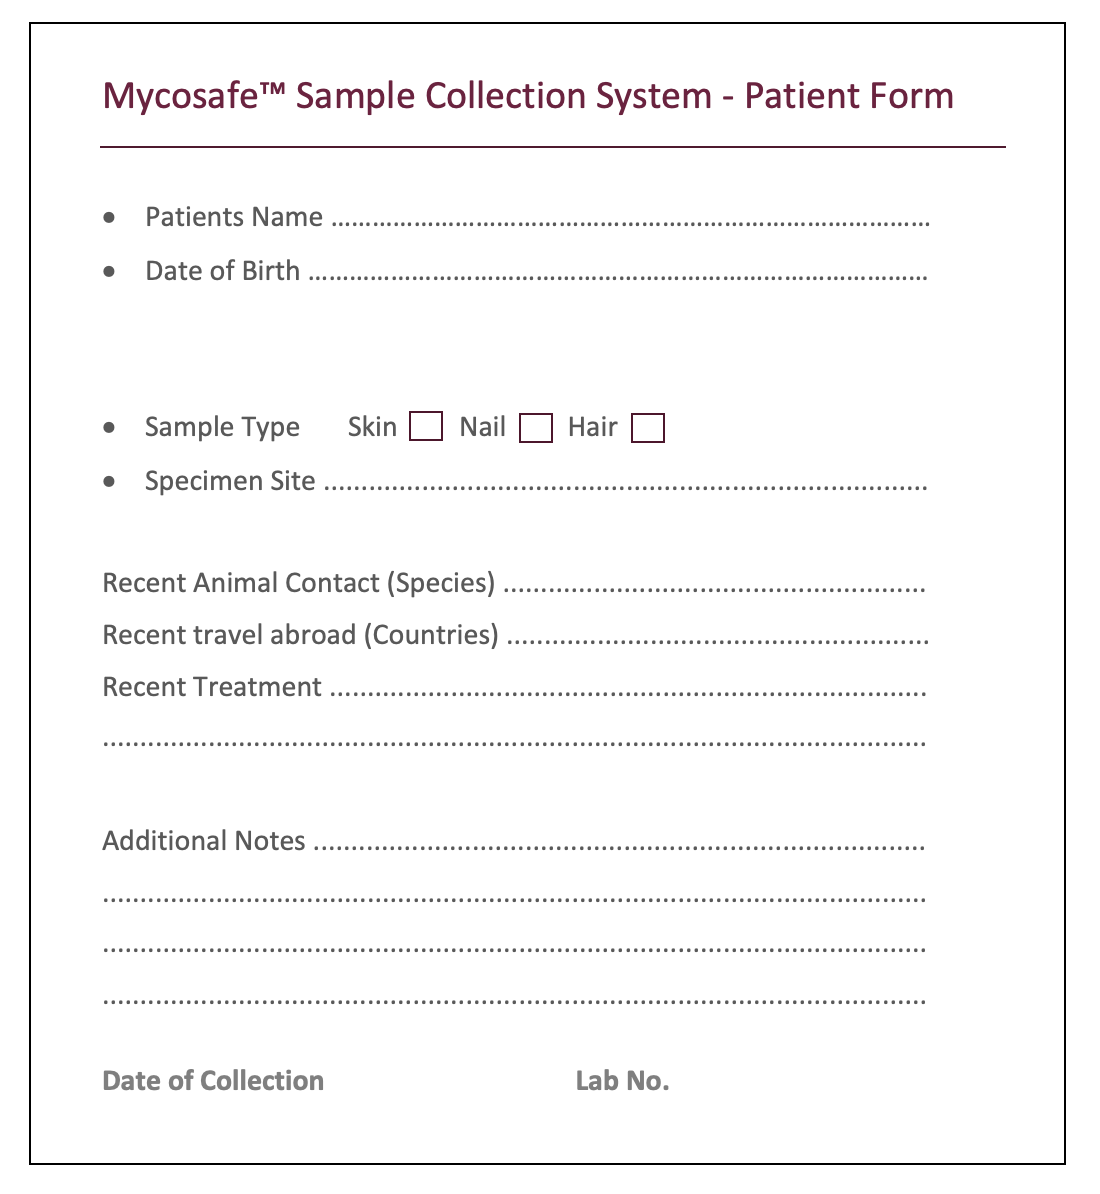 Mycosafe Sample Collection System